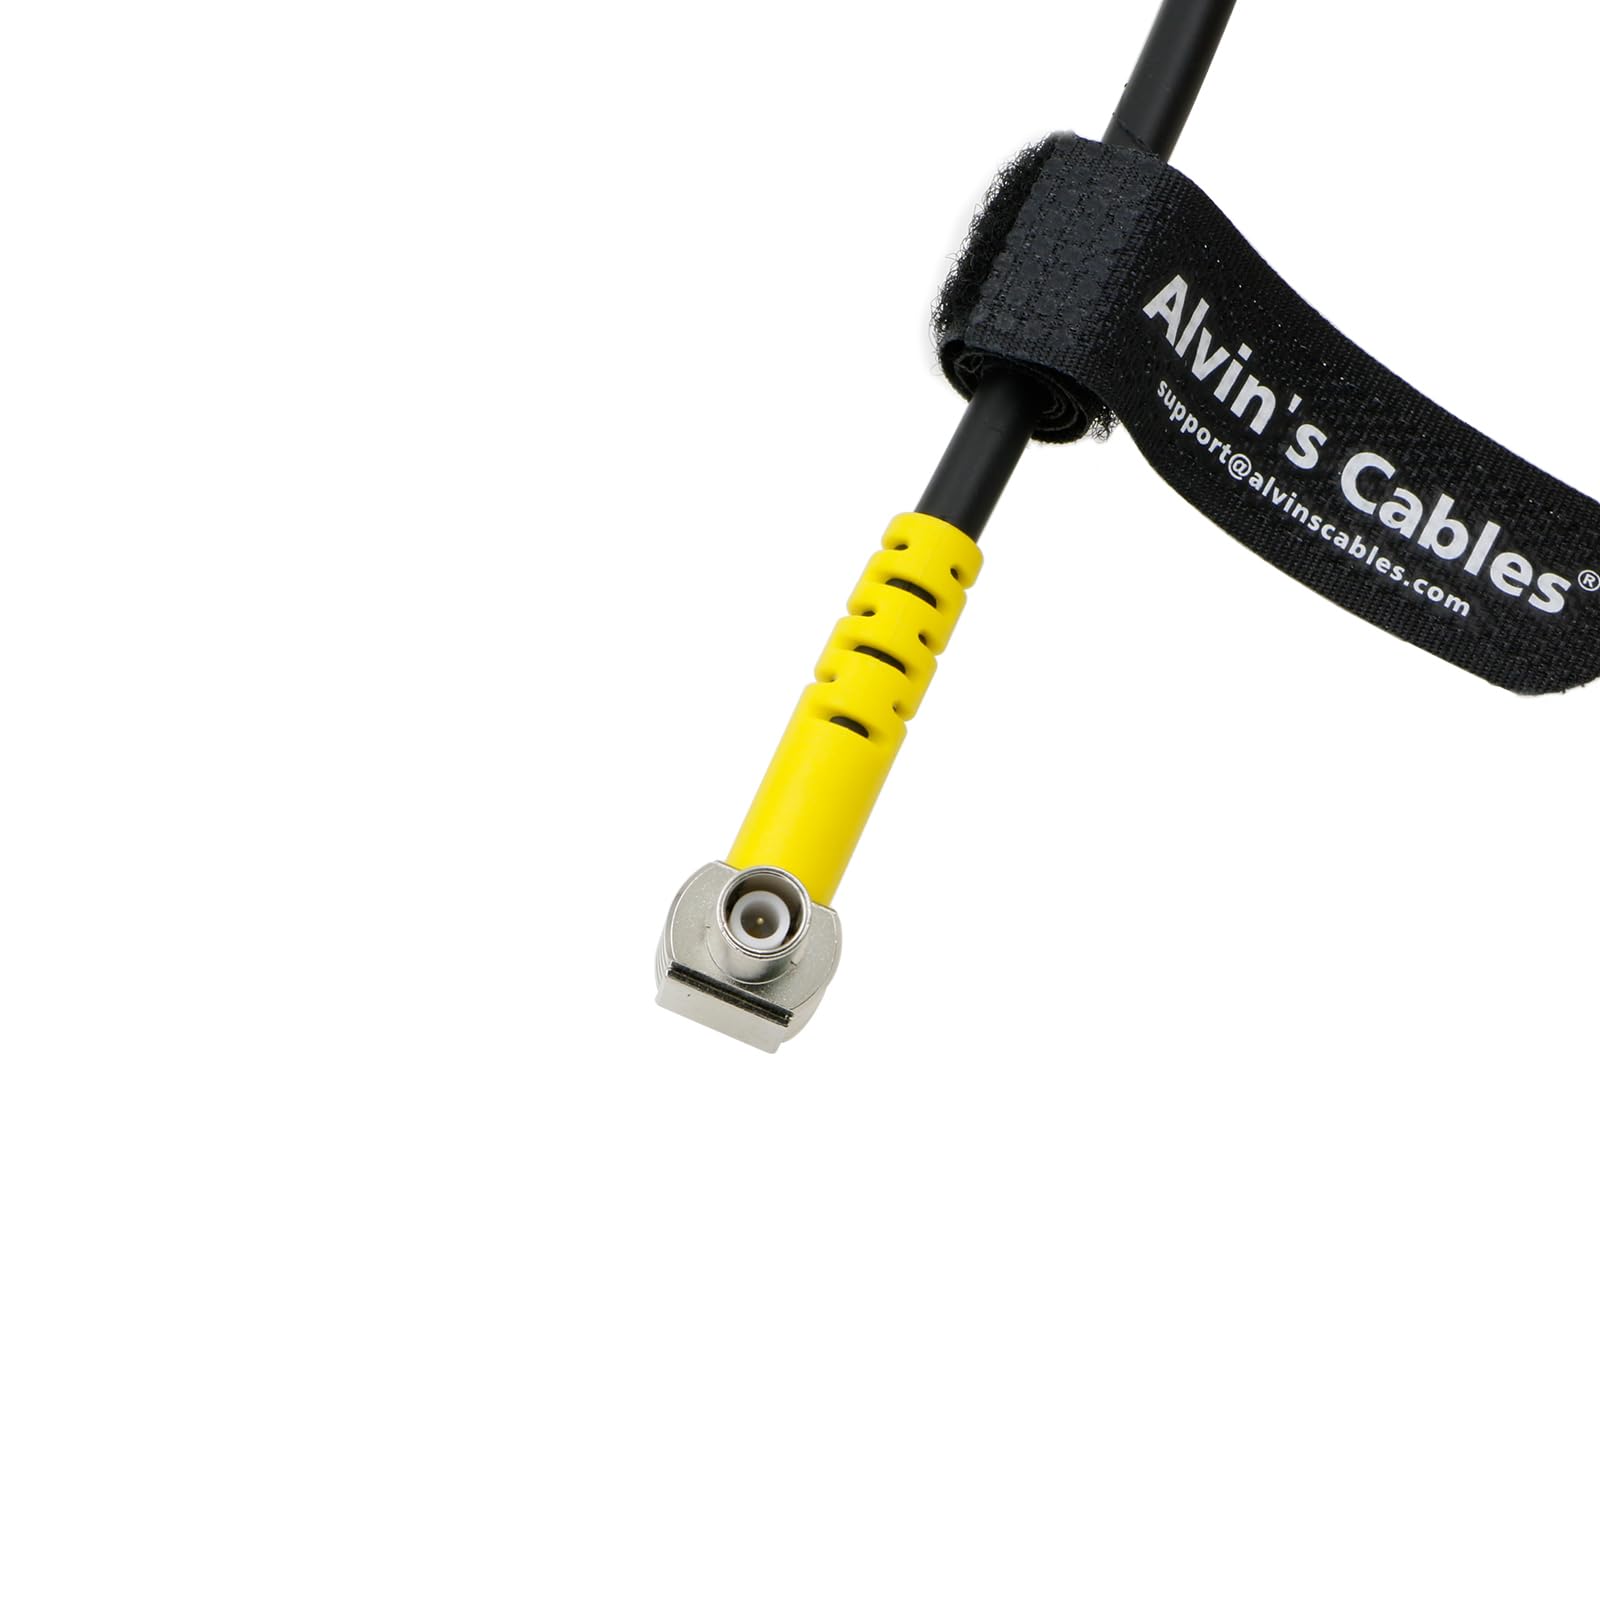 Alvin's Cables MVF-2 Viewfinder Cable for ARRI Alexa Mini LF Camera Right Angle 1 Pin Male to Male 19.7in/50cm